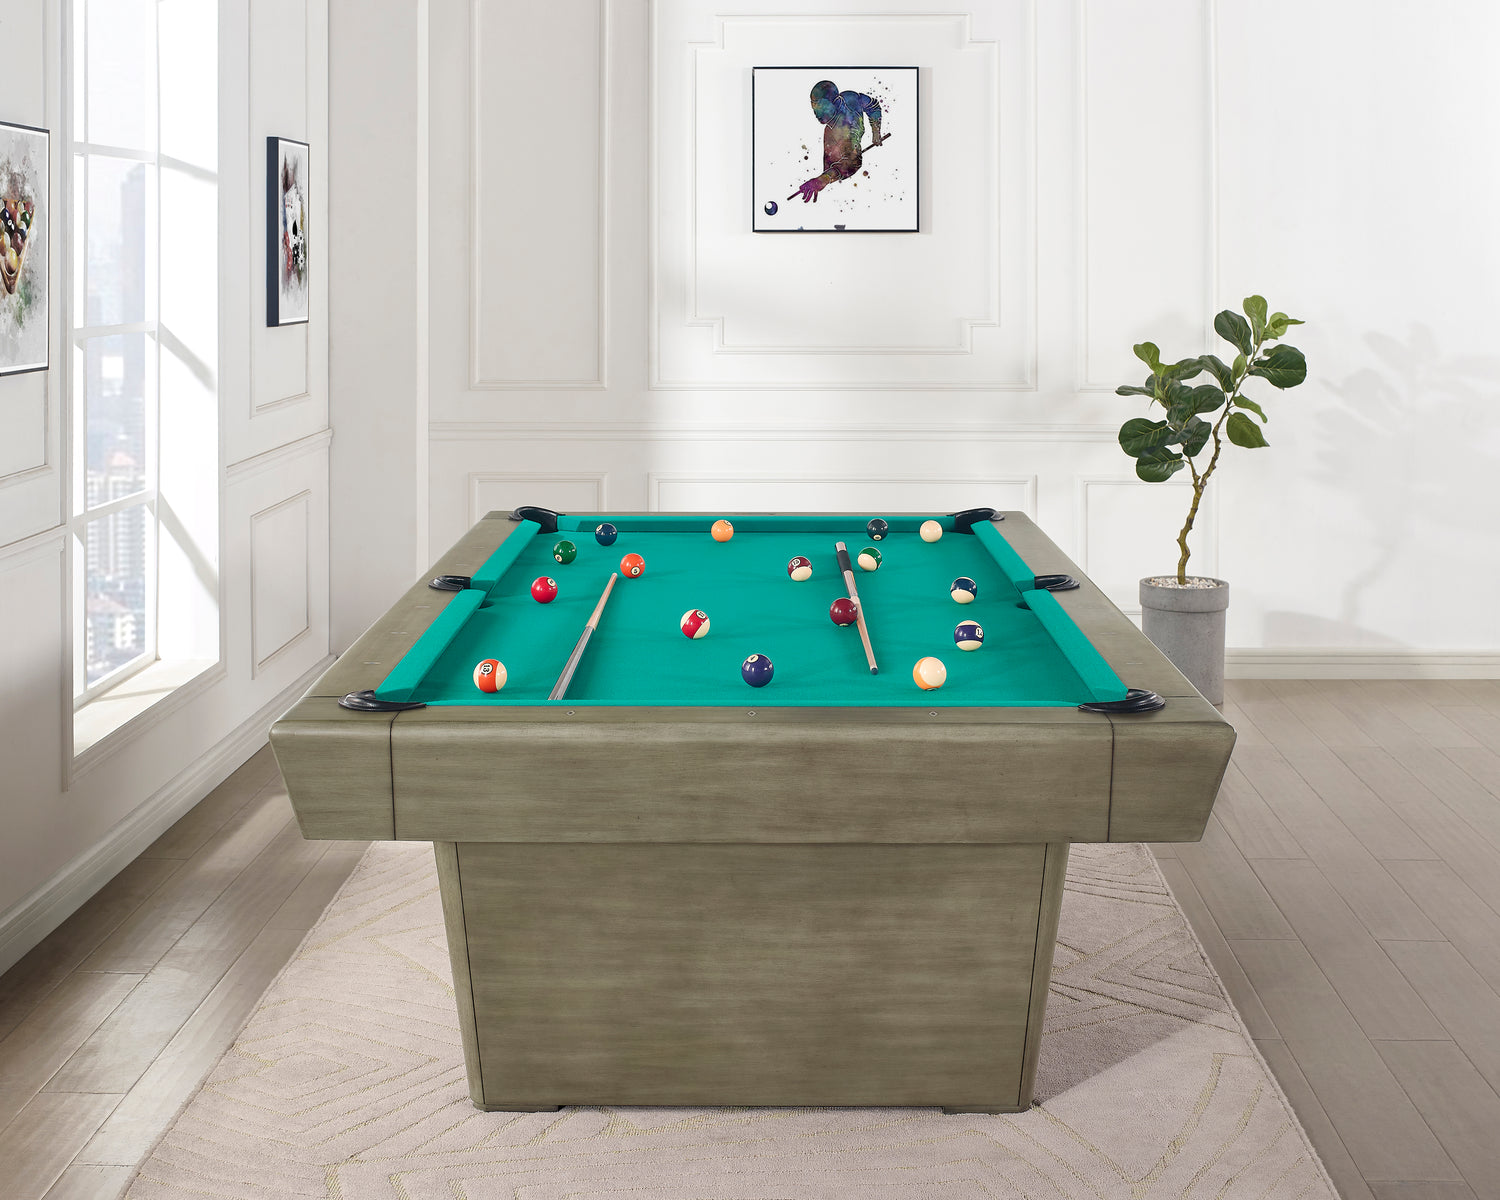 Legacy Billiards Conasauga 8 Ft Pool Table in Overcast Finish with Traditional Green Cloth - Room Scene - End View